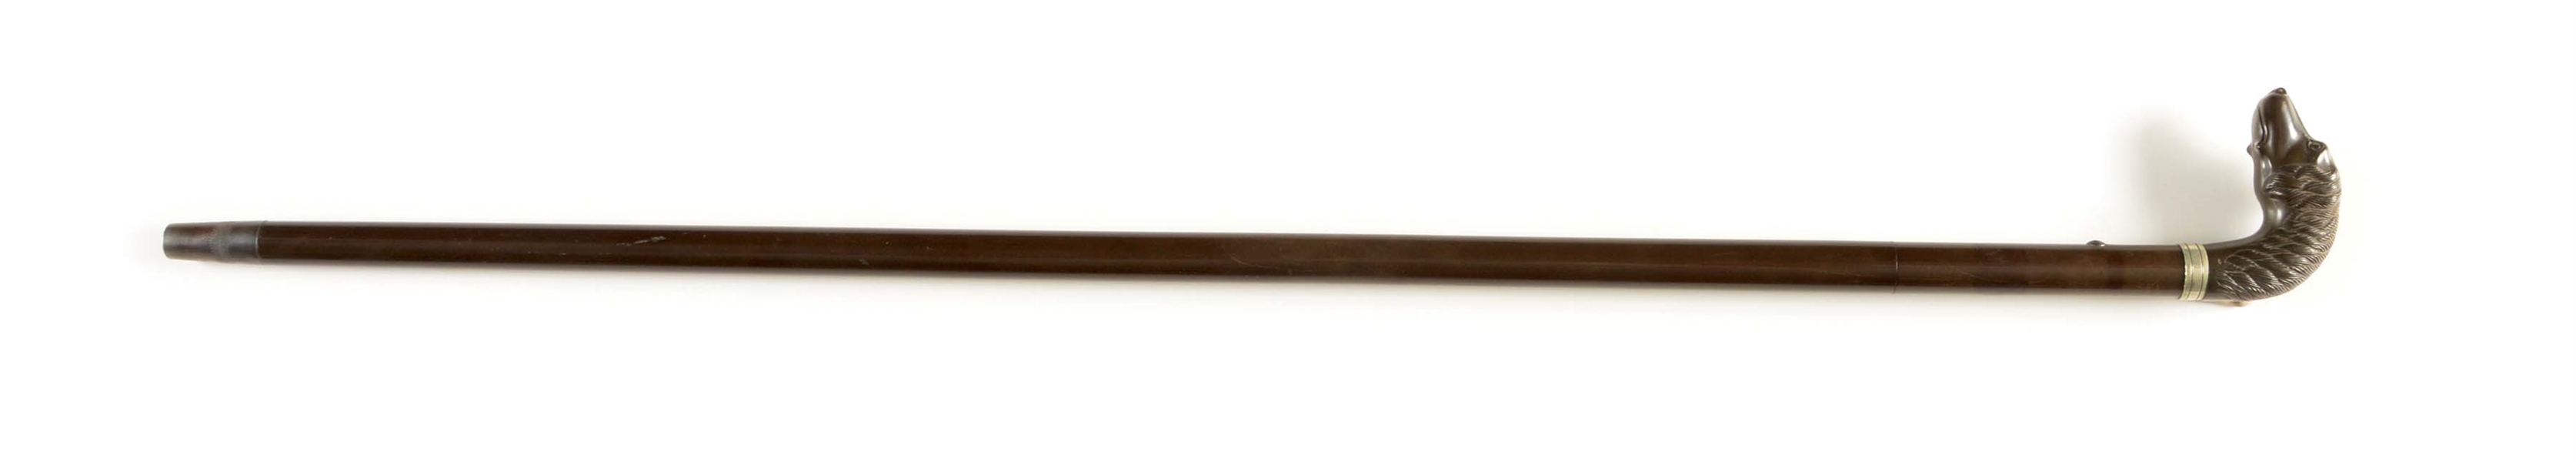 (A) A SCARCE AND SOUGHT AFTER LARGE DOG HEAD REMINGTON RIFLE CANE IN UNDAMAGED CONDITION THROUGHOUT.